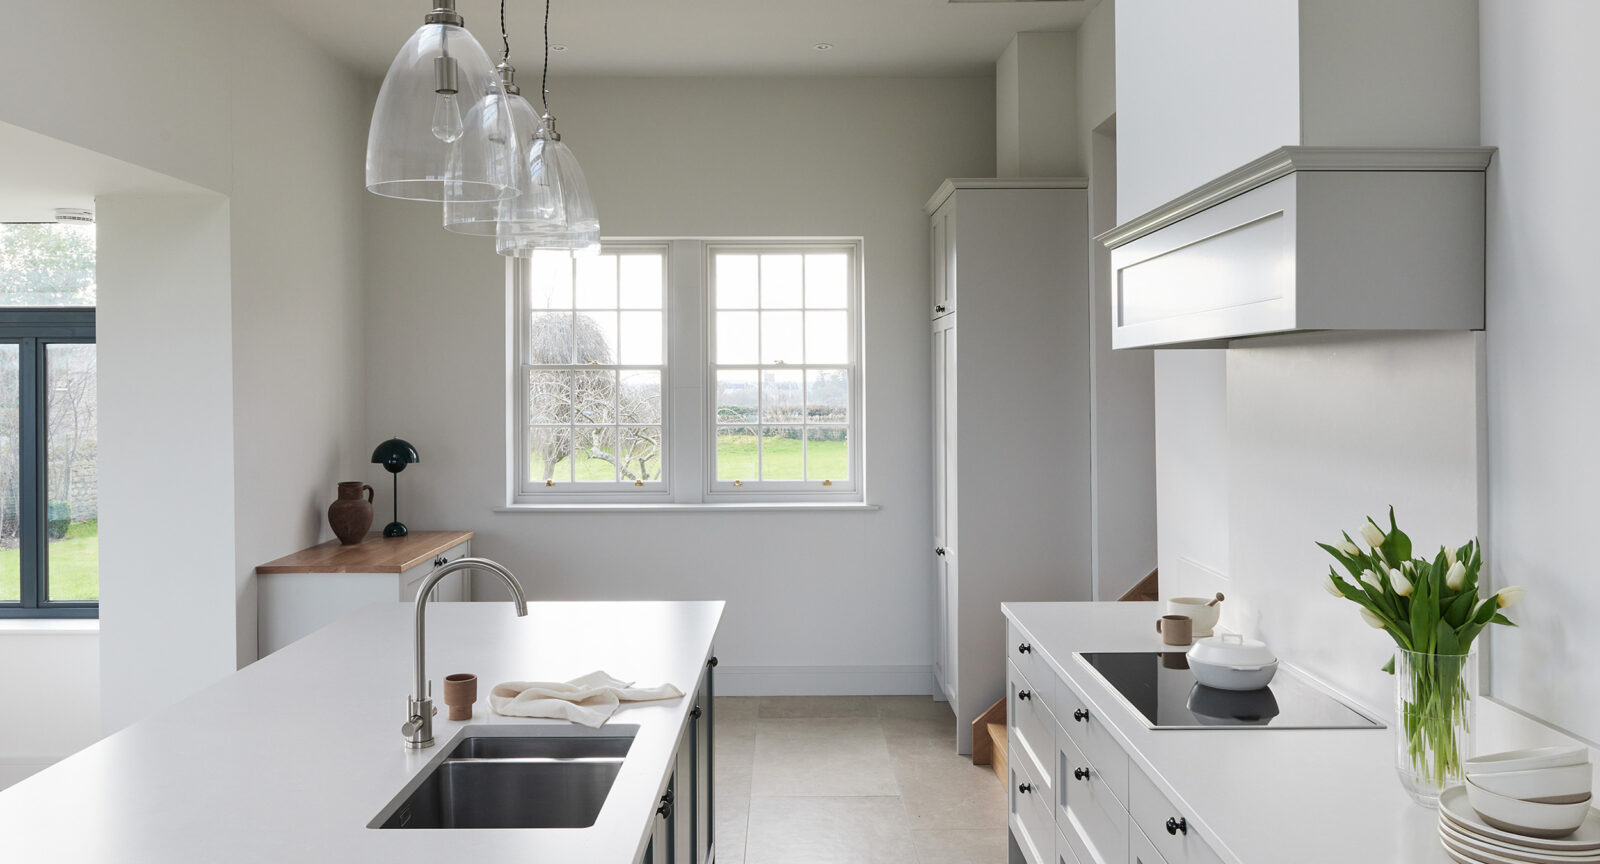 Tips for Renovating Your Kitchen